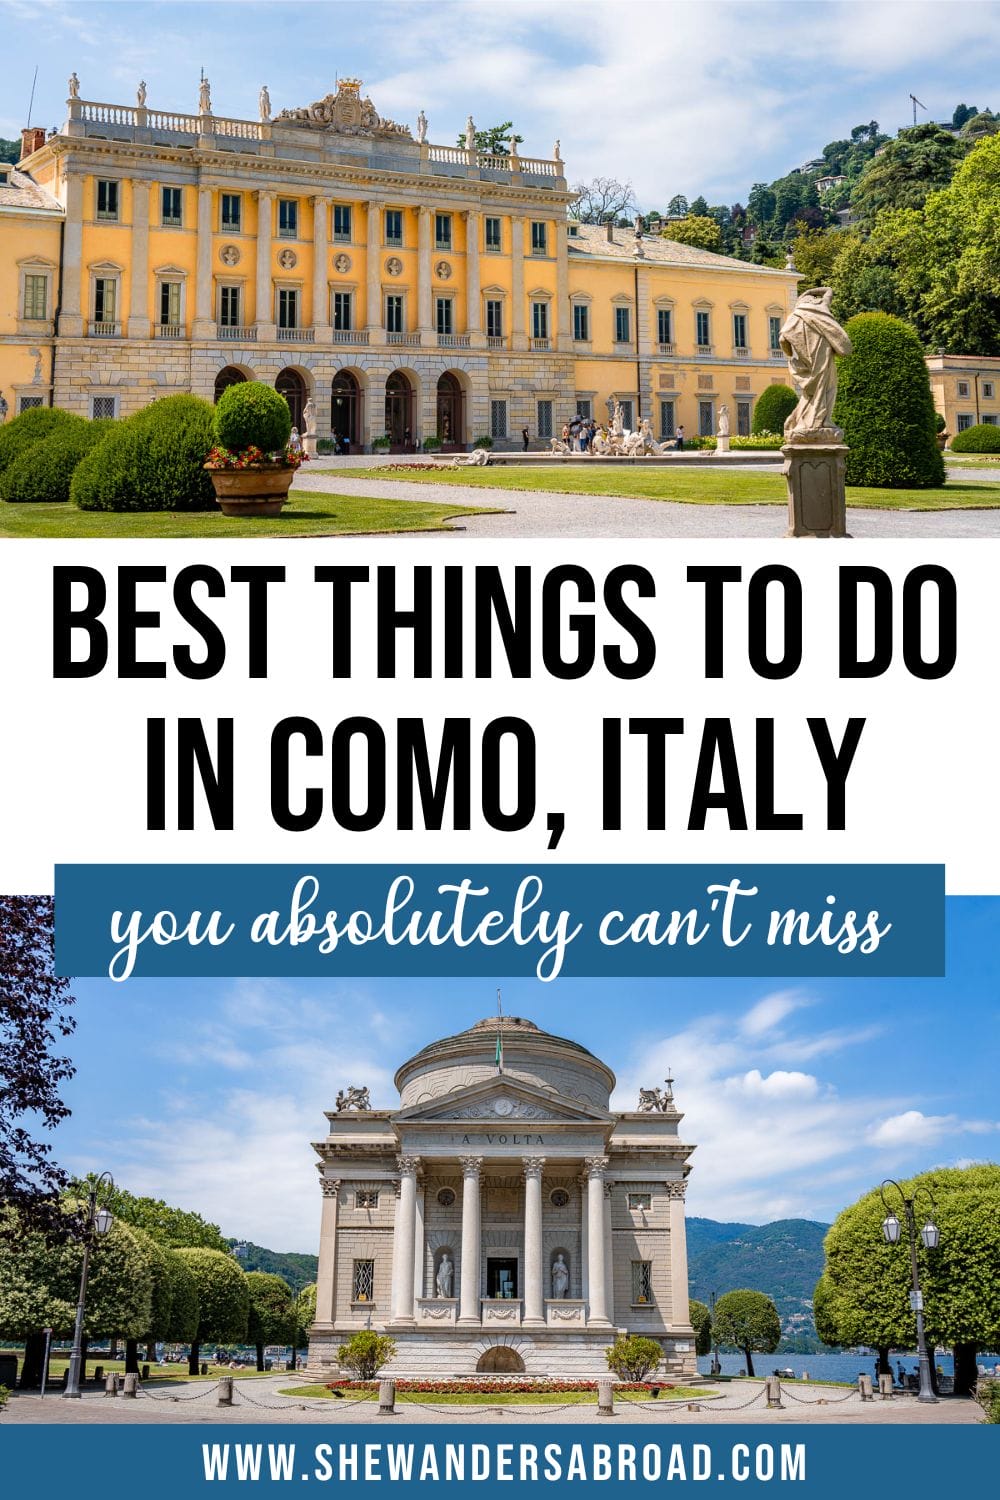 18 Best Things to Do in Como, Italy (+ Practical Tips for Visiting)